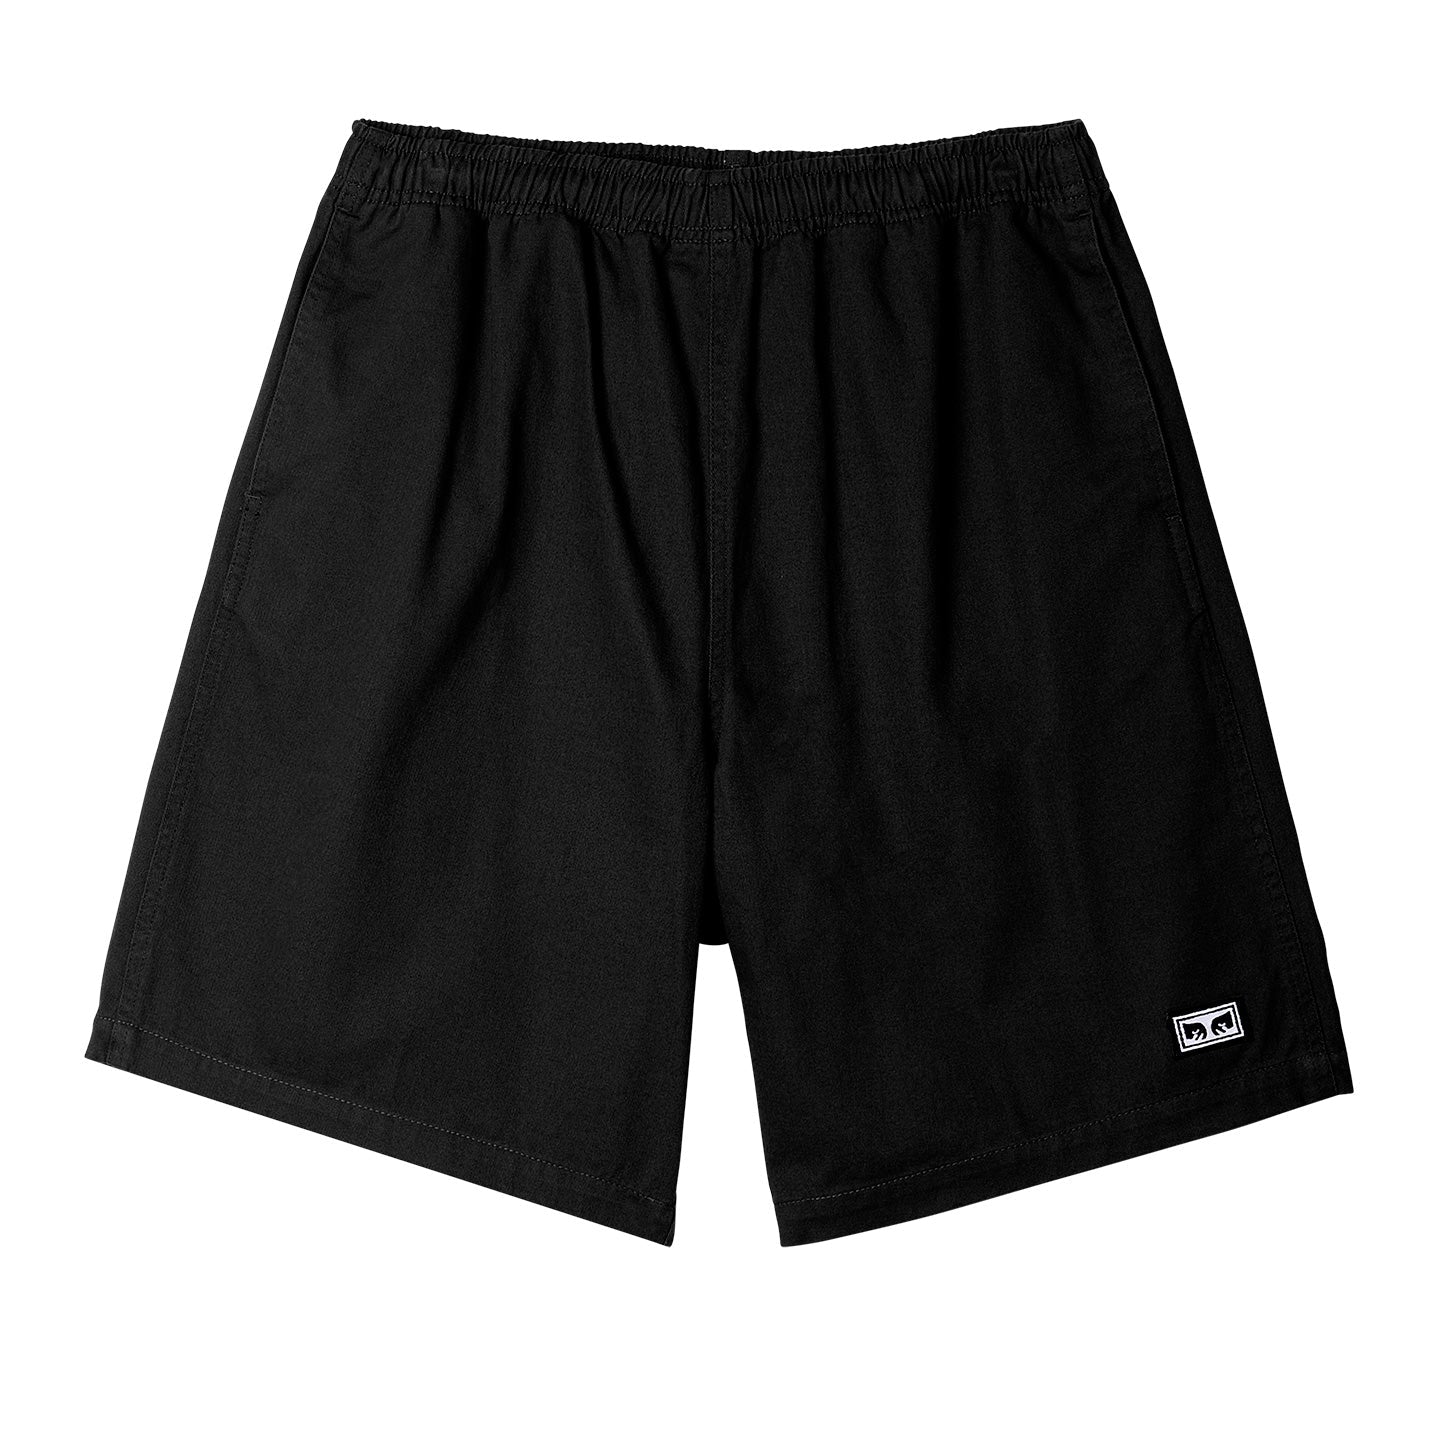 Obey Men's Easy Relaxed Twill Short Black 172120078 BLK